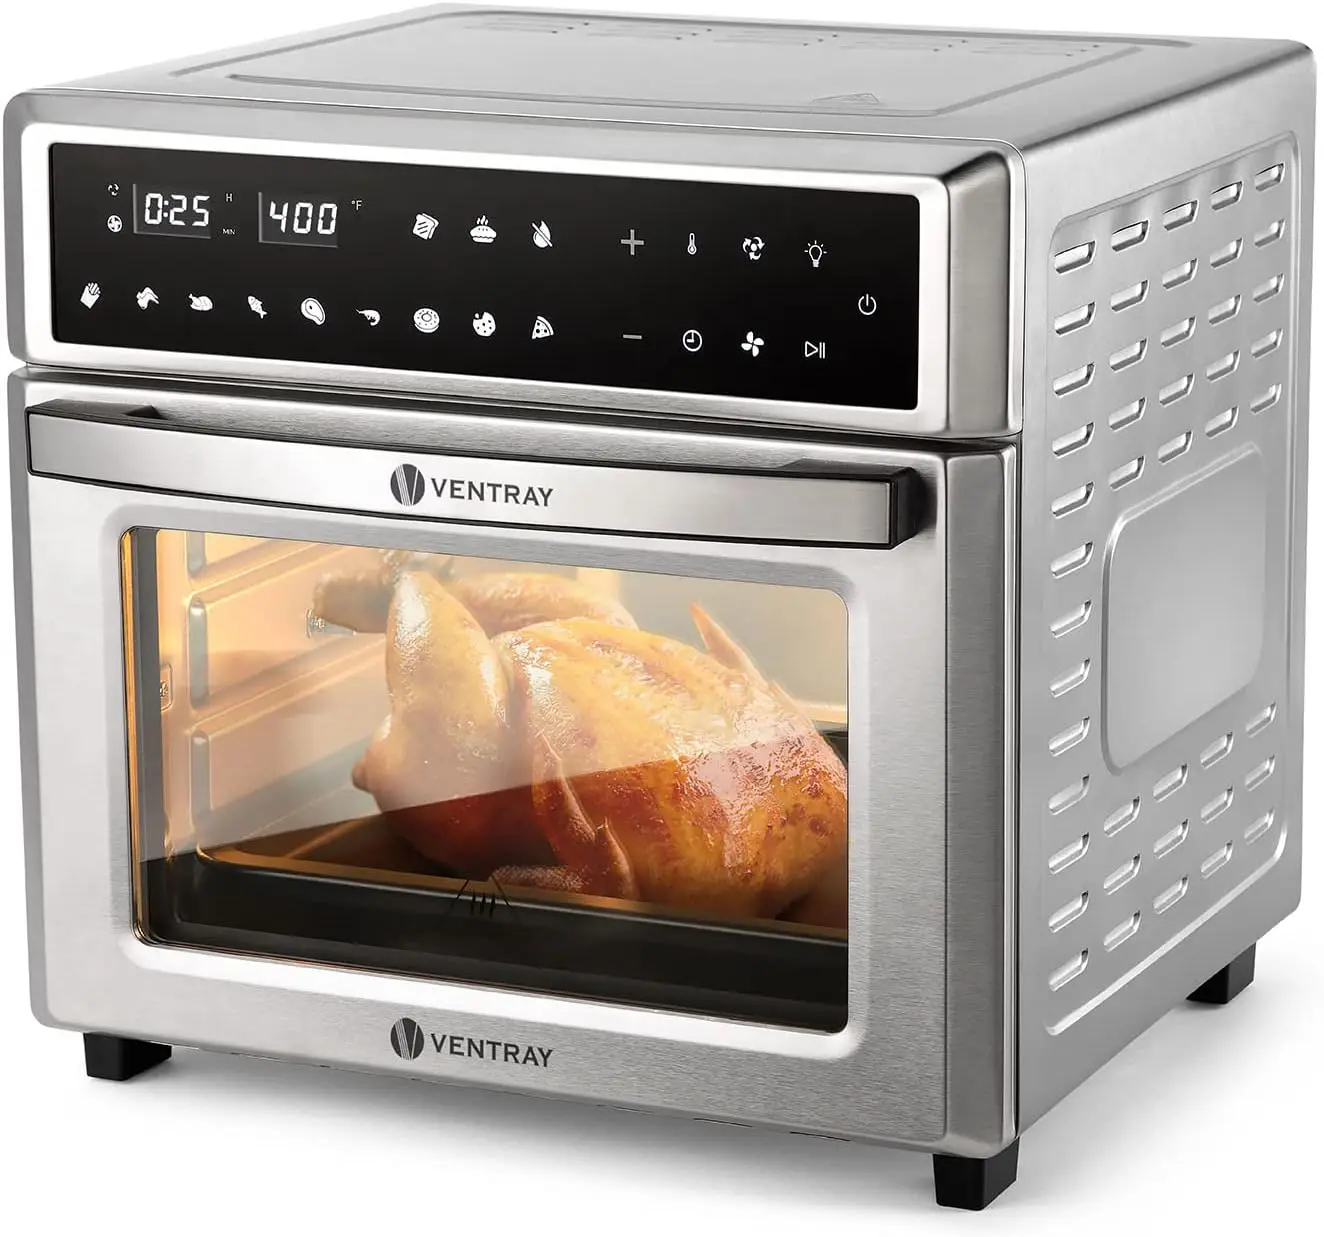 

VENTRAY Convection Oven Air Fryer Toaster Oven 1700W 26QT Digital Control Stainless Steel Electric Ovens with Bake PanBroil Rack